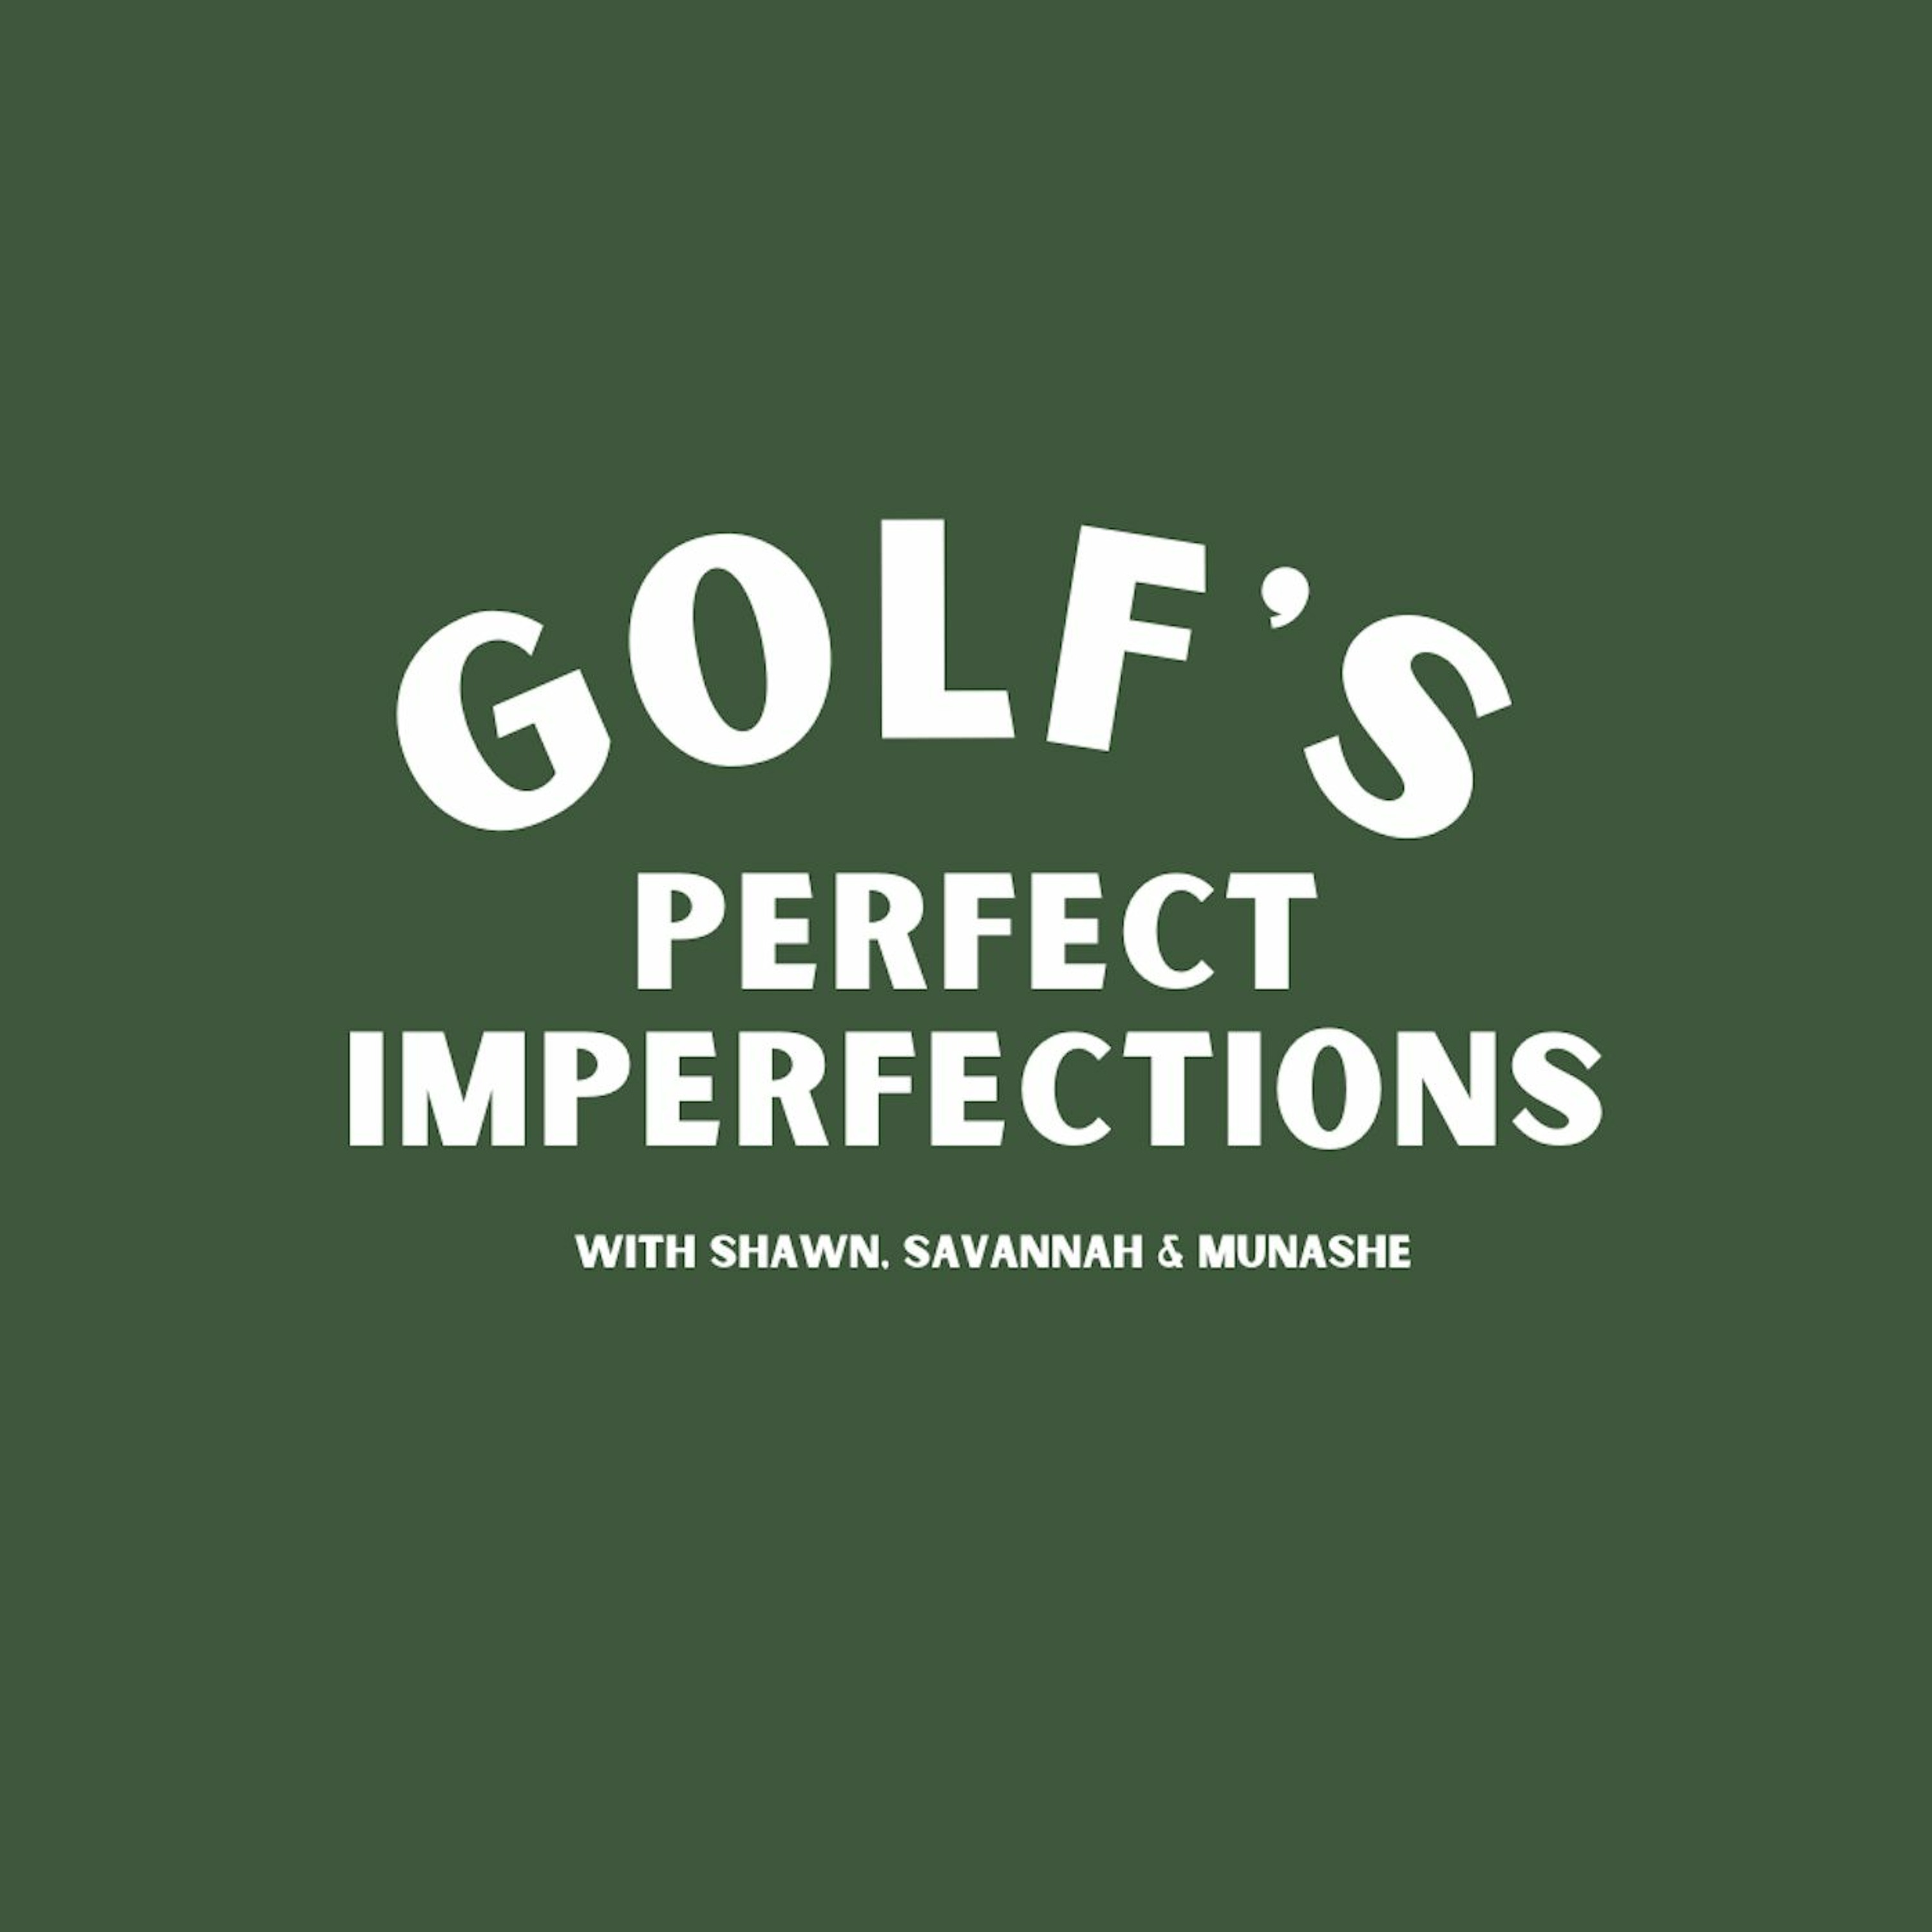 Golf’s Perfect Imperfections: How to feel super comfortable over the golf ball.